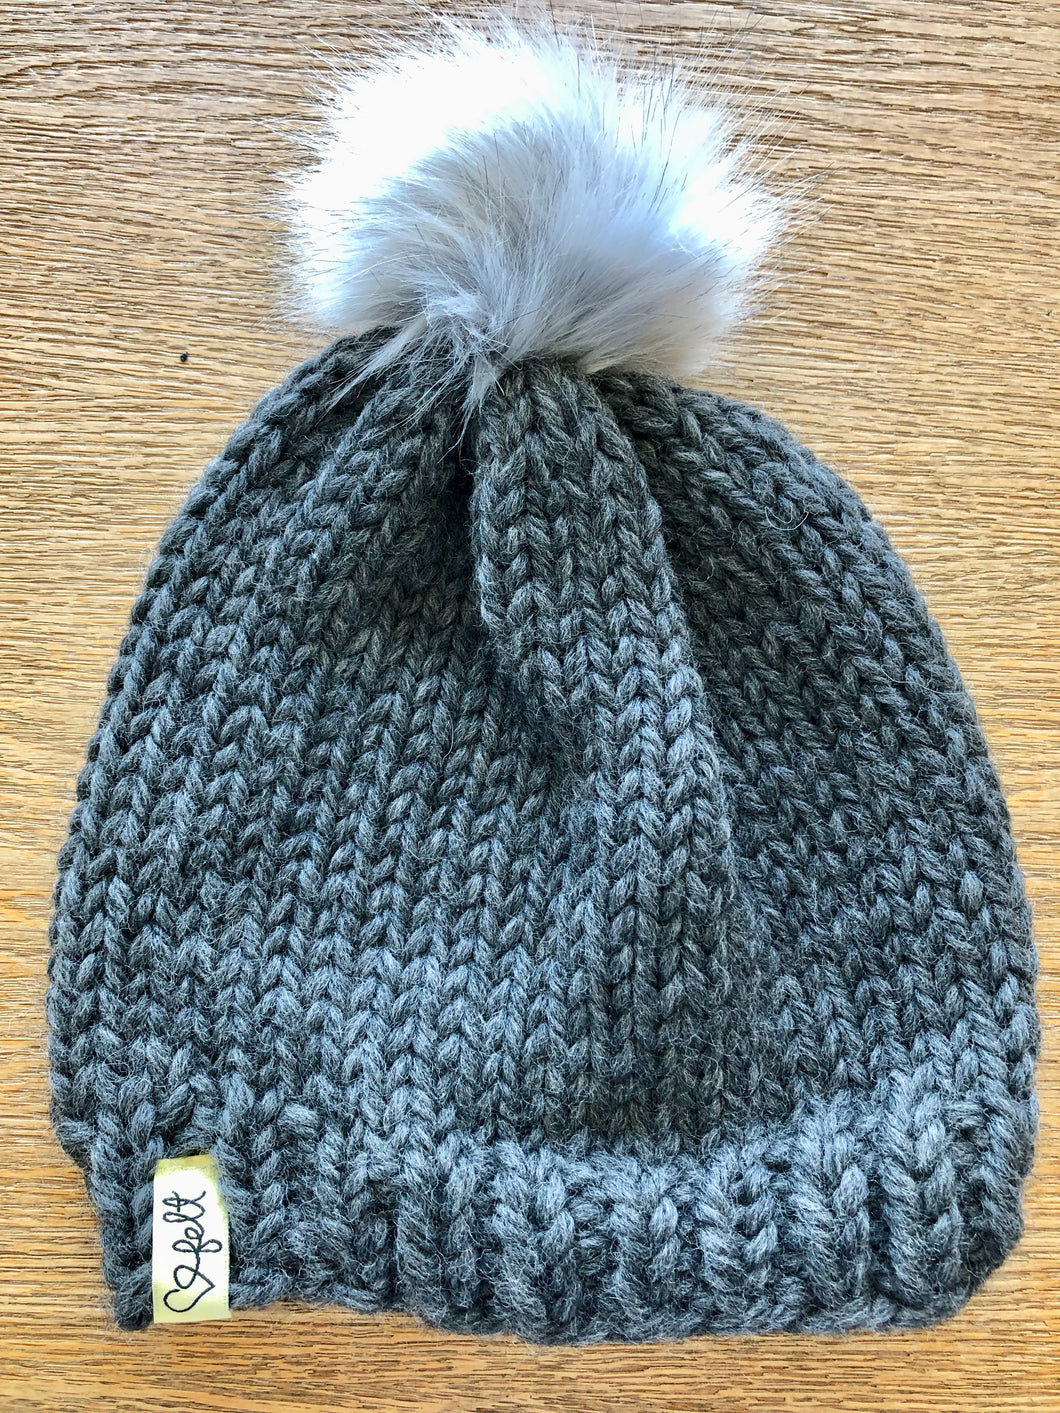 'Heart Felt' Toques: Solids with pompoms